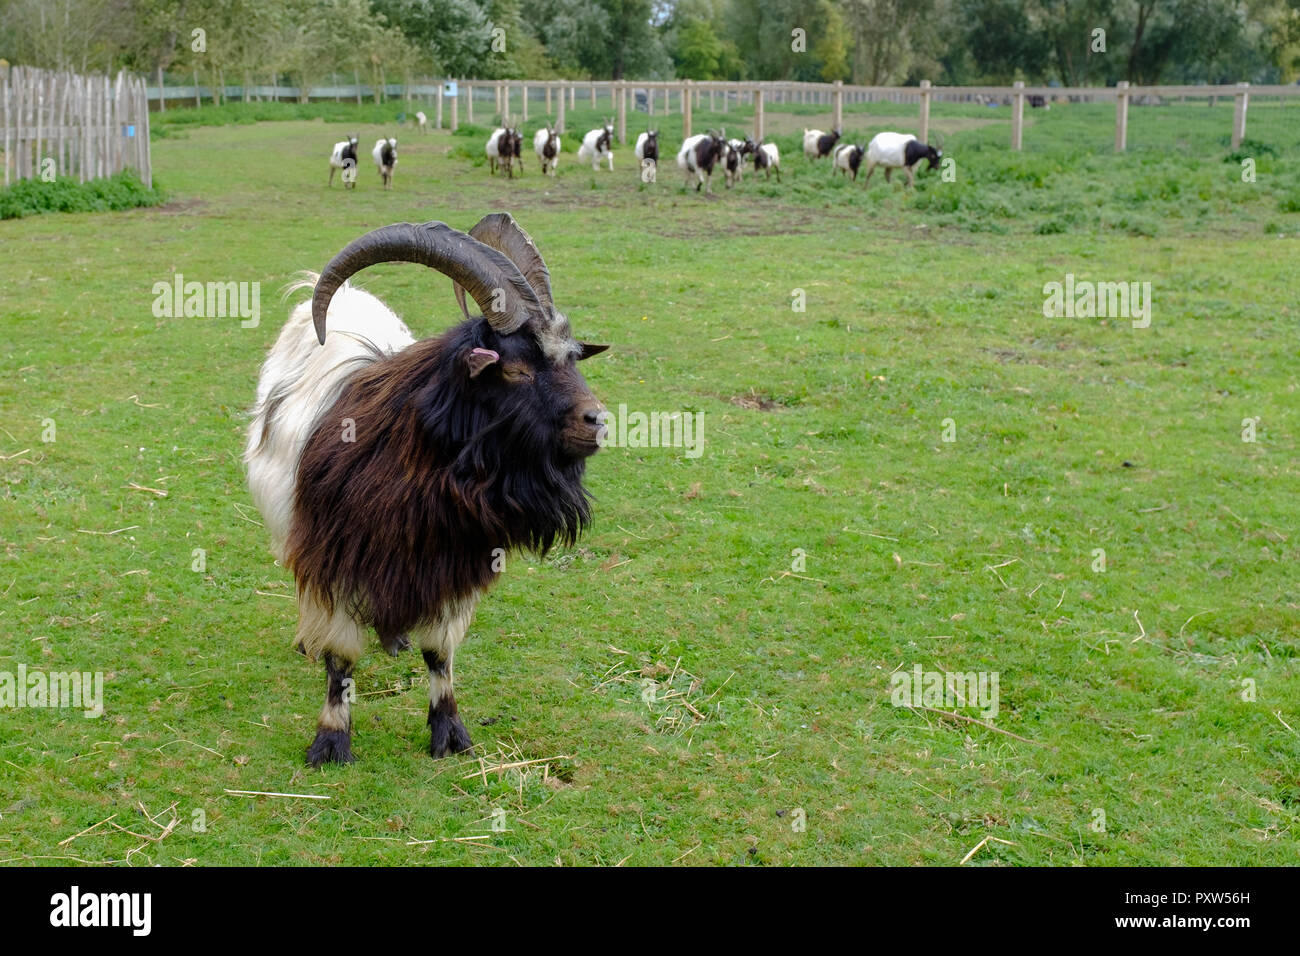 Bagot Goat with other Bagot goats in background, ancient breed recorded 1387 in England, used in conservation grazing on brambles and weeds. Stock Photo